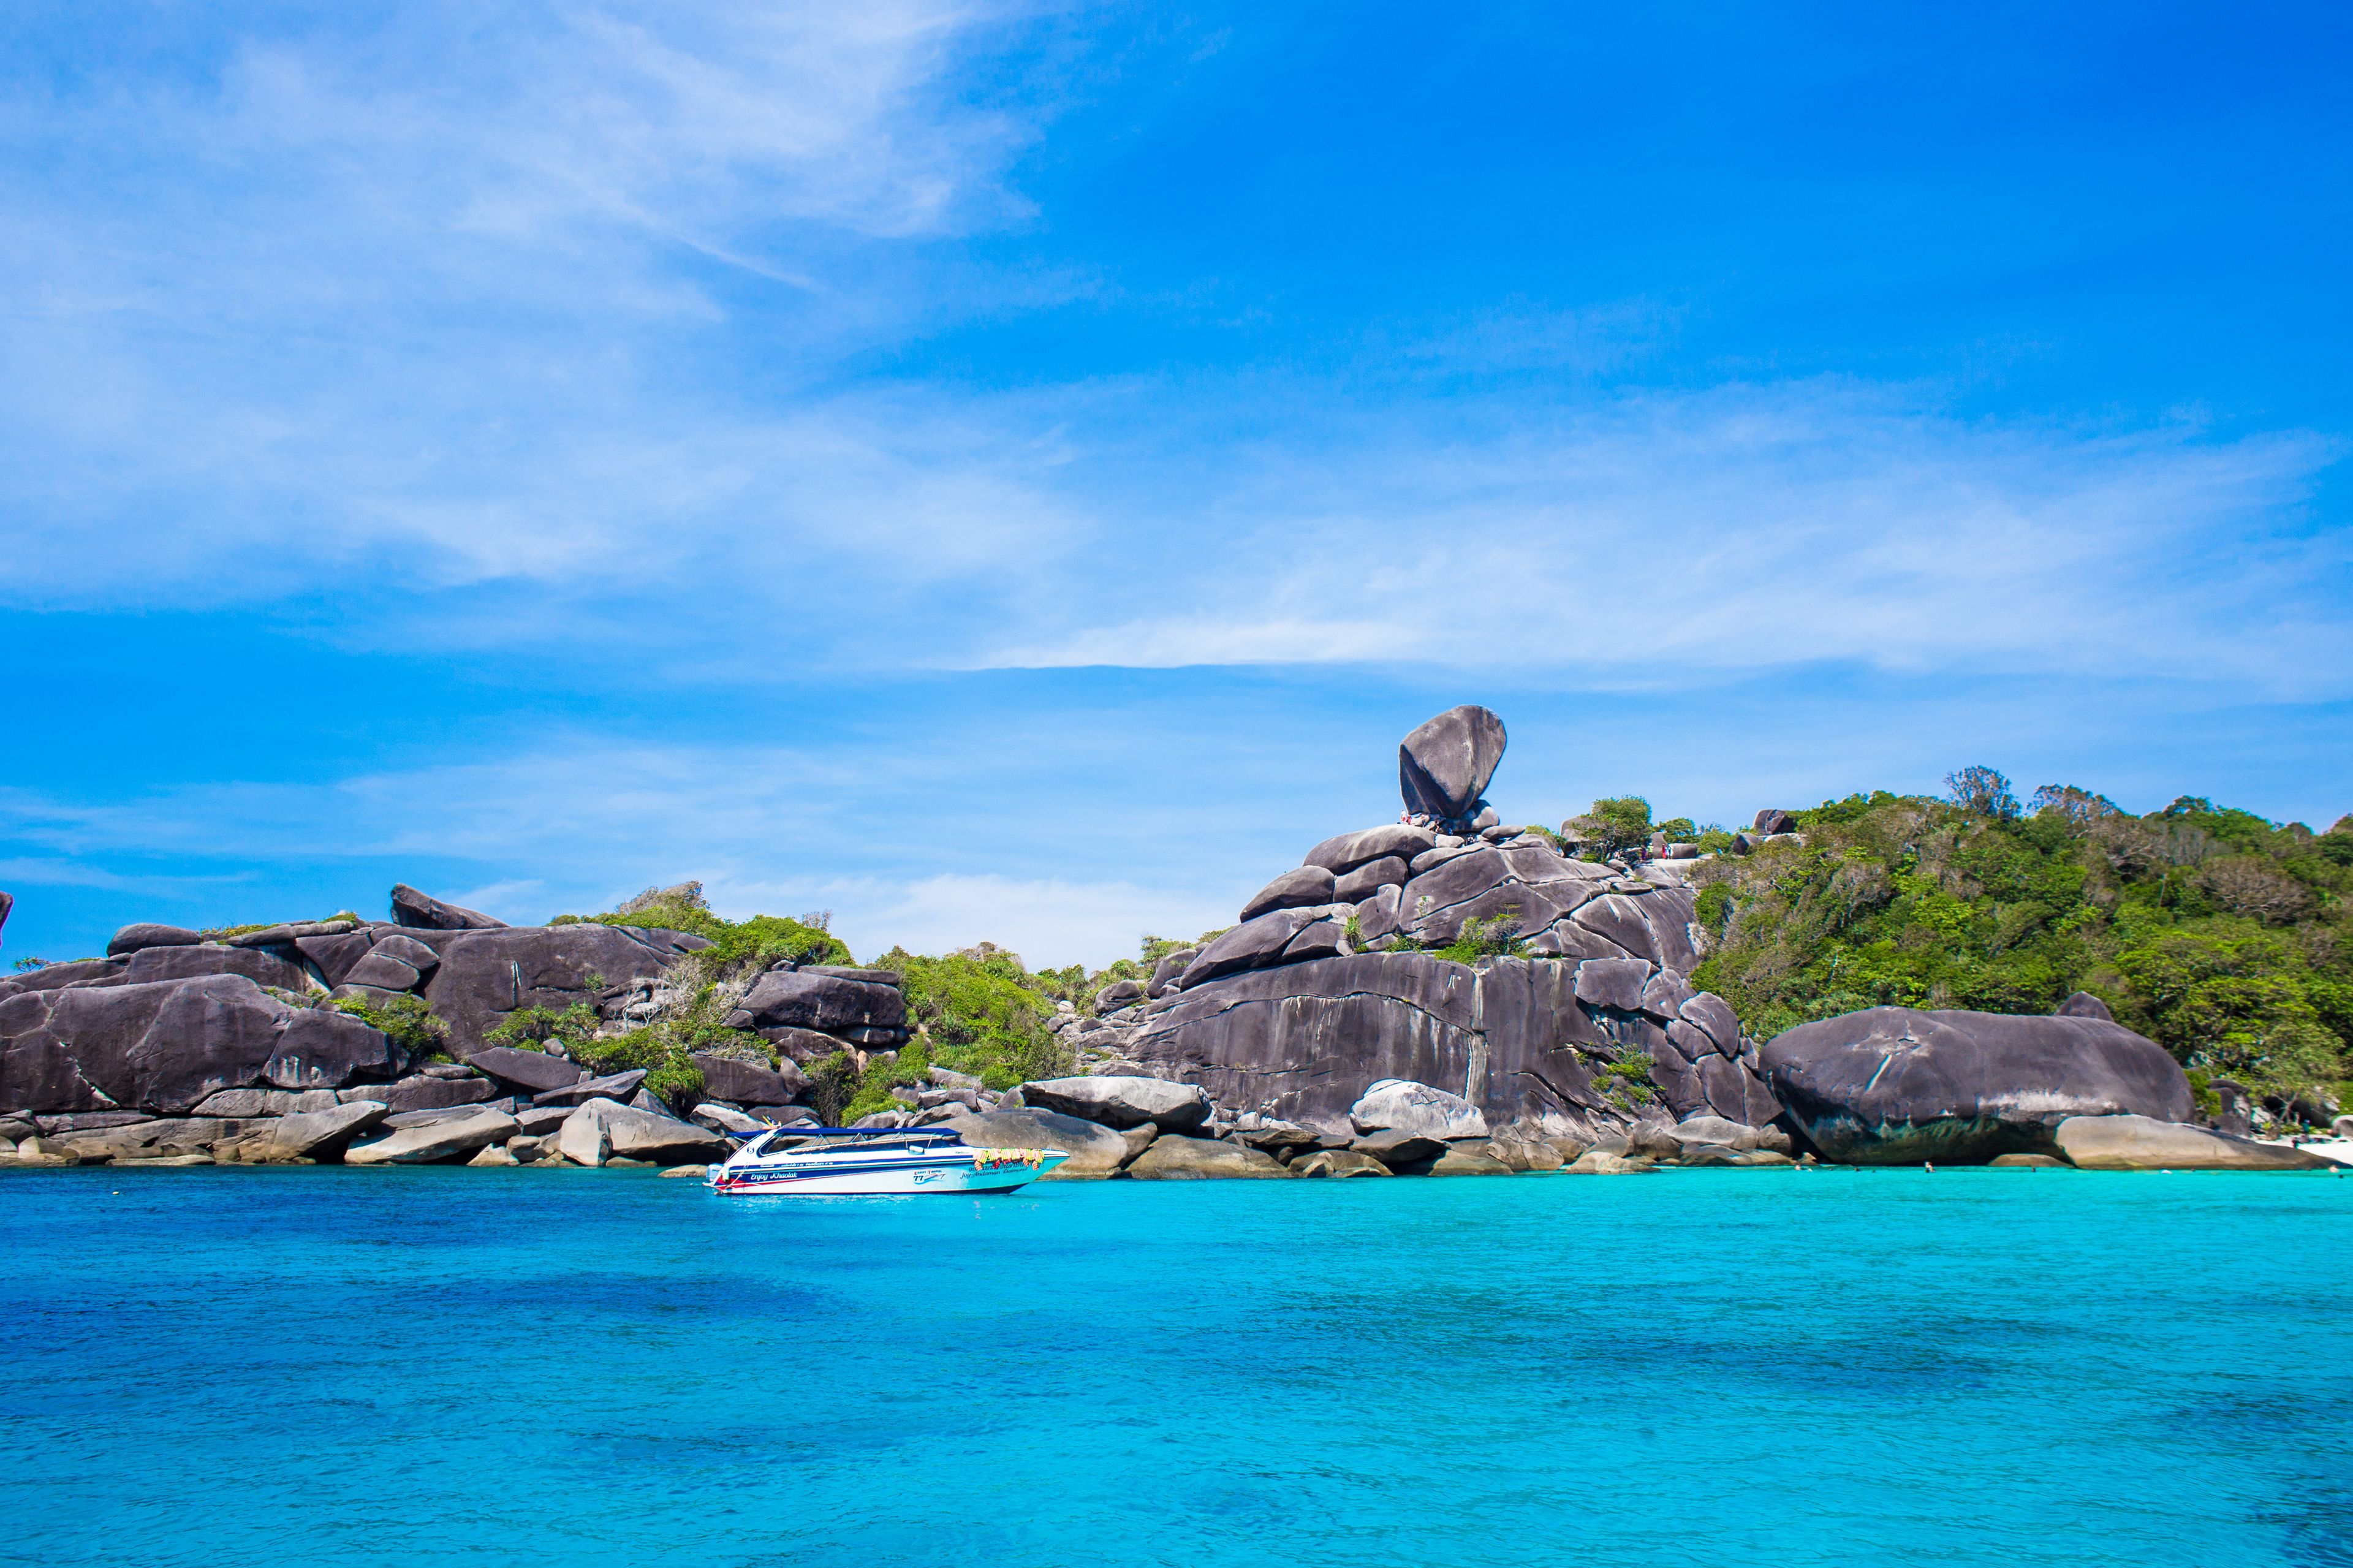 Things To Do In Similan Islands 2020 - Activities & Attractions